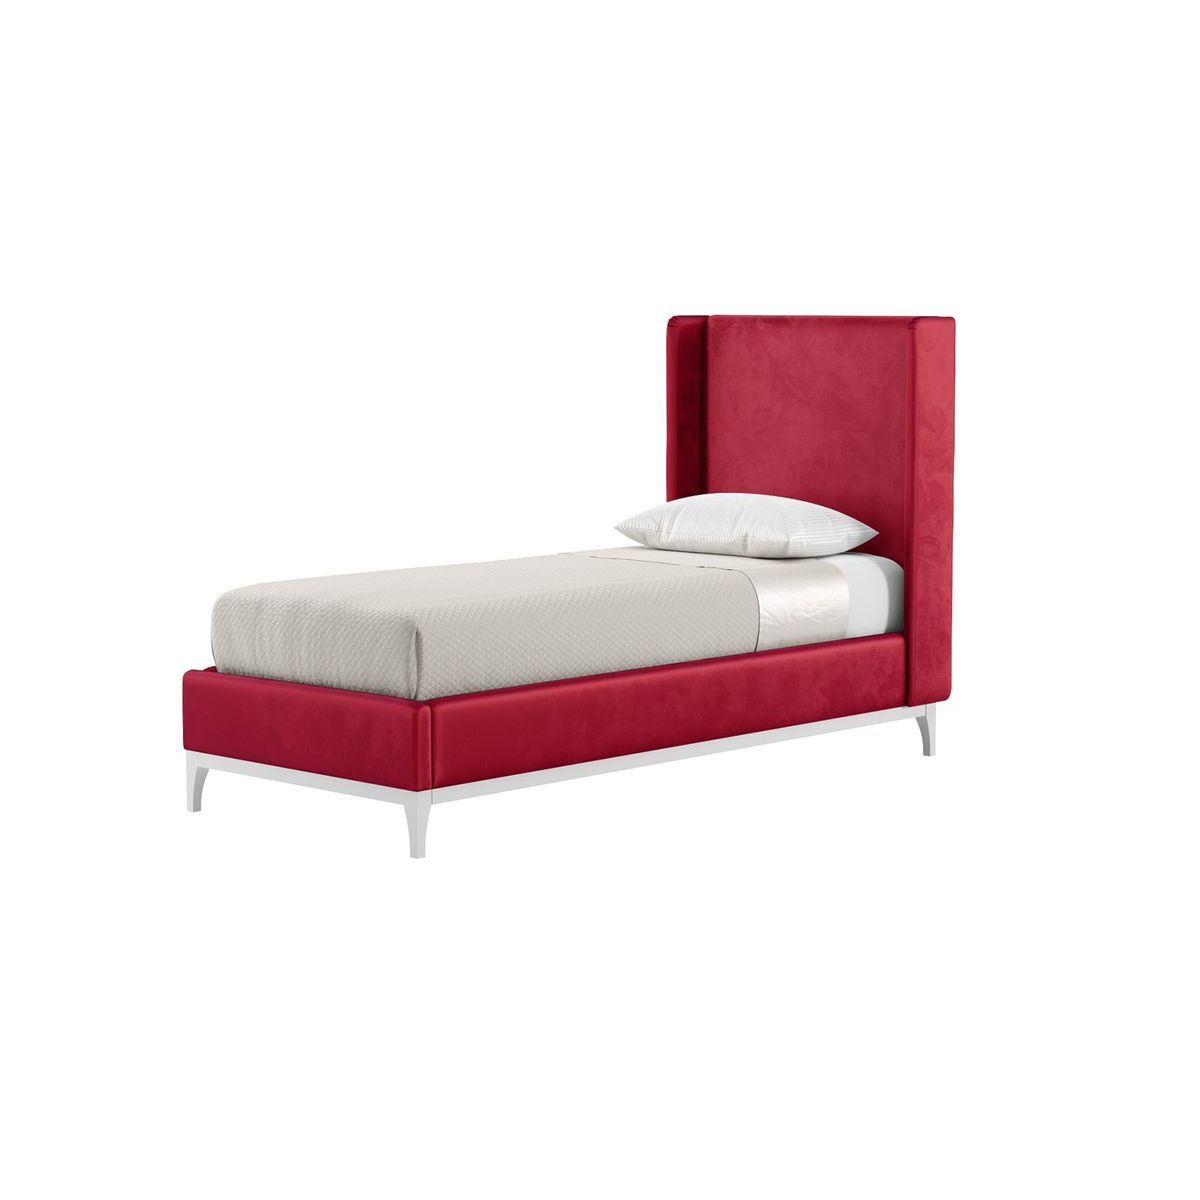 Diane 3ft Single Bed Frame with modern smooth wing headboard, dark red, Leg colour: white - image 1